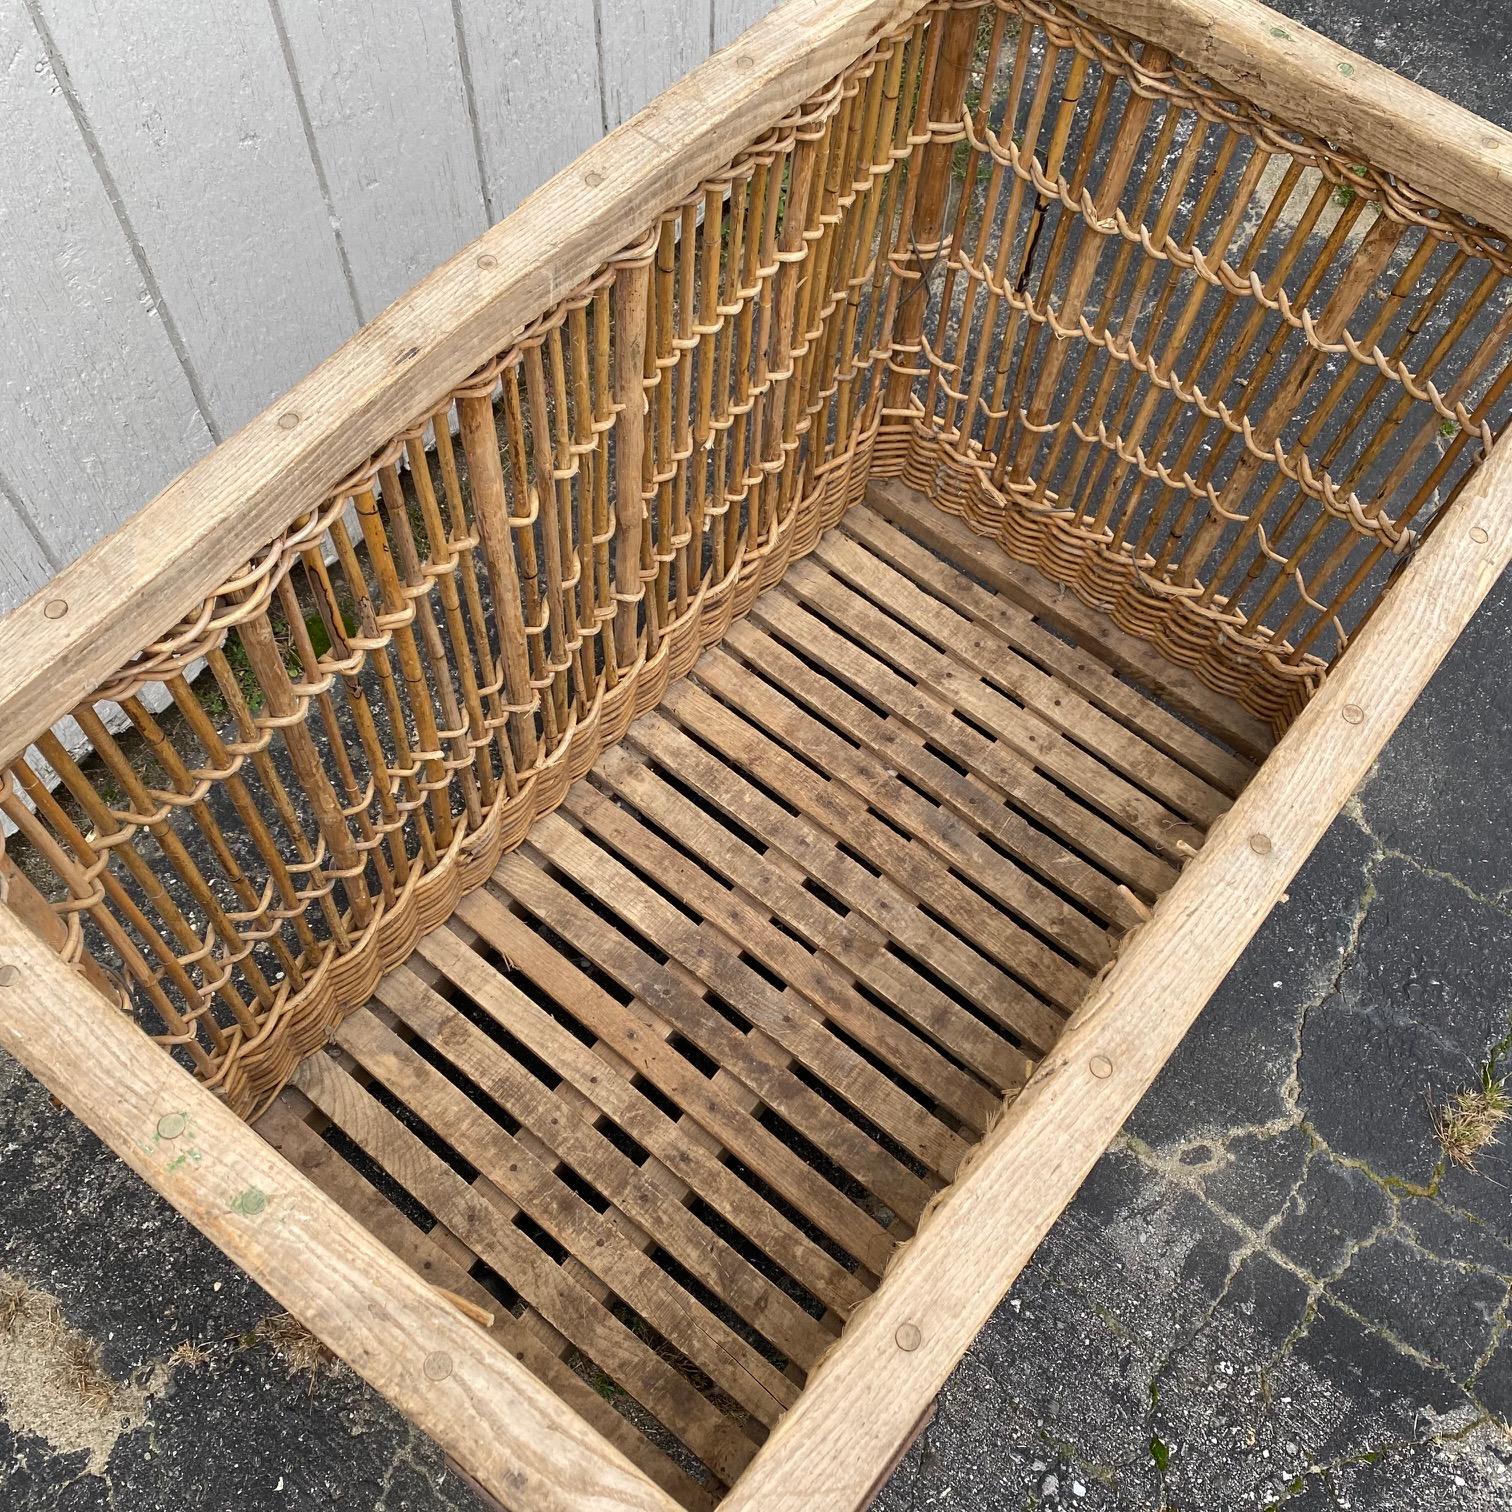 Wonderfully large, gorgeous, sturdy, fresh-from-a-French-bakery (in 1900) cart. A substantial steel frame and wicker/rattan multipurpose cart from a French bakery  - or can also be a laundry bin on wheels, or a phenomenal wood storage or firewood